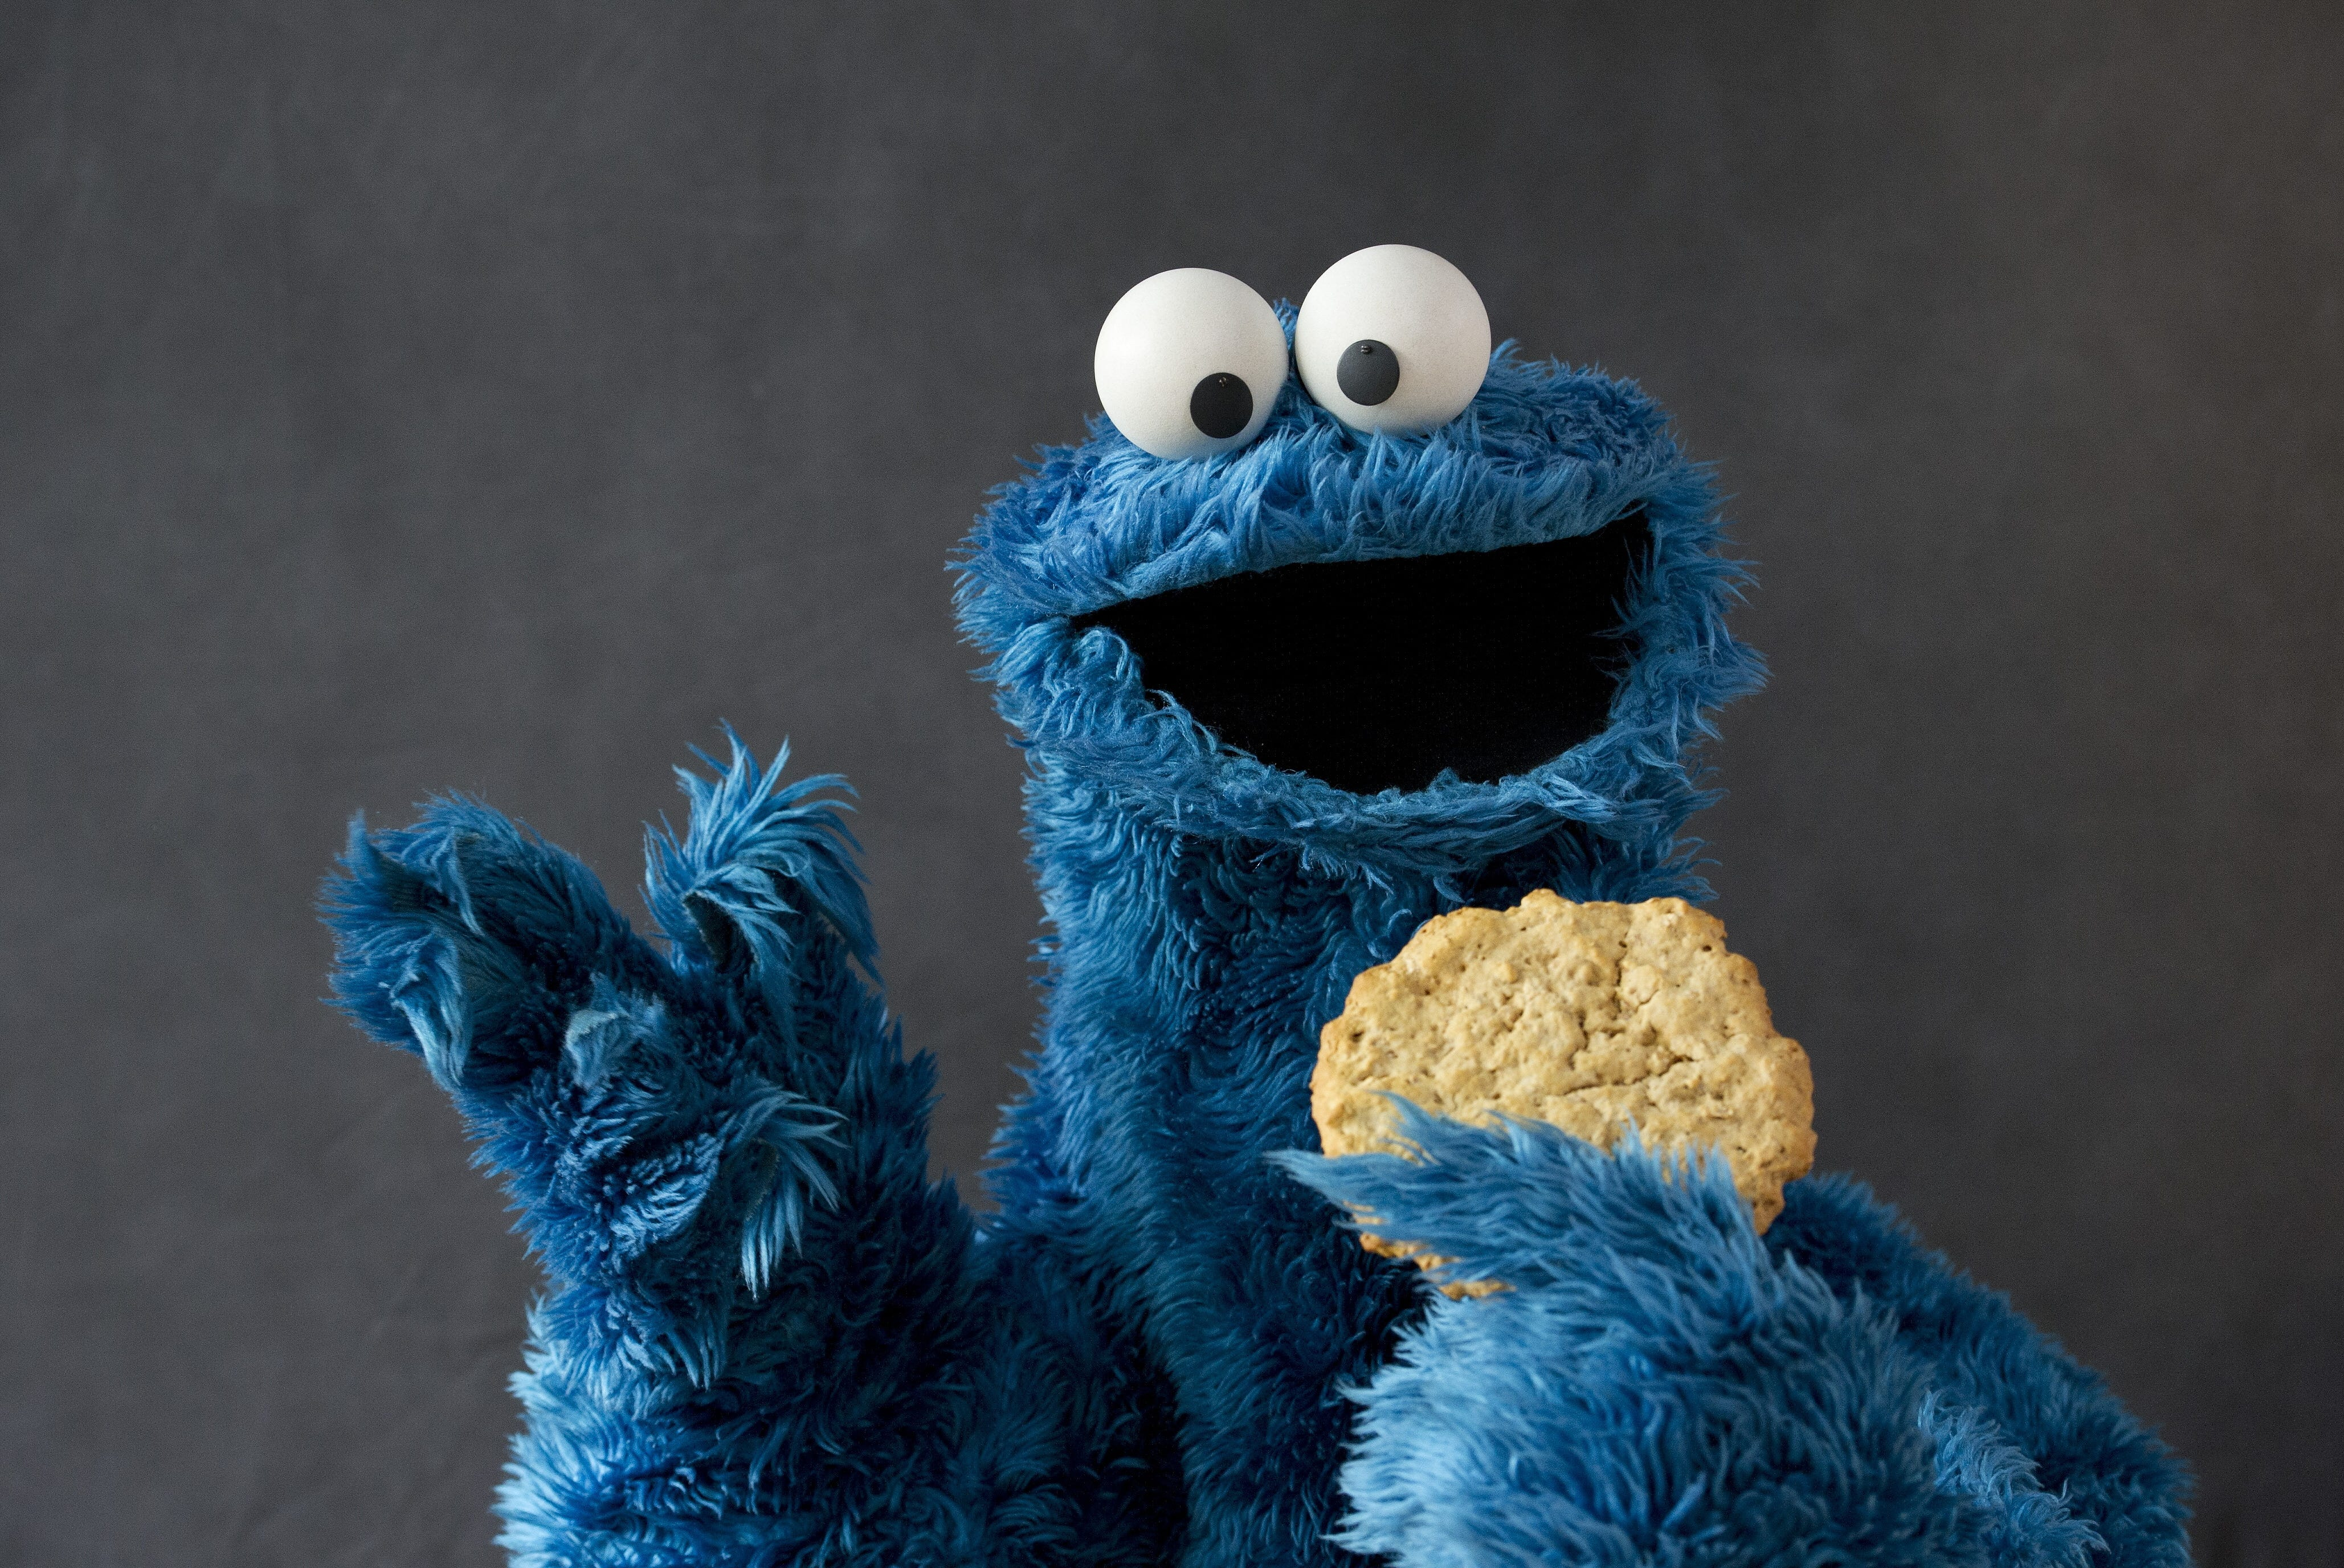 Name That News: Uh-oh... The Cookie Monster says size really does matter